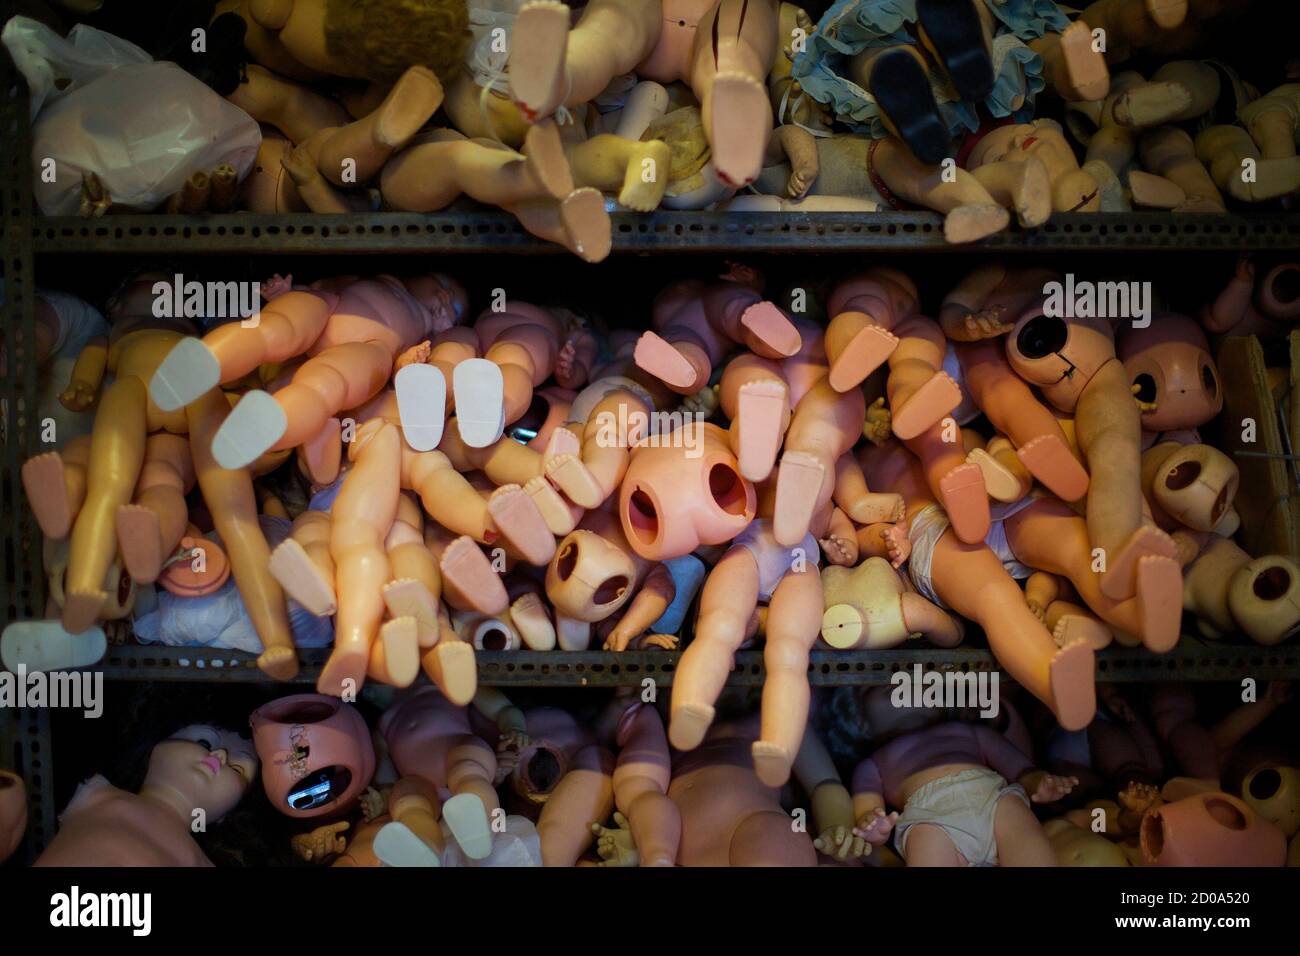 Hundreds of doll limbs are pictured stacked on shelves inside the workshop of Sydney's Doll Hospital, July 12, 2014.  The Doll Hospital, a family business over 100 years old, employs a handful of skilled workers to restore and repair people's childhood treasures. In an age where plastic dolls are mass produced, few dolls hospitals around the world have survived.  Picture taken July 12, 2014.   REUTERS/Jason Reed   (AUSTRALIA - Tags: SOCIETY) Stock Photo